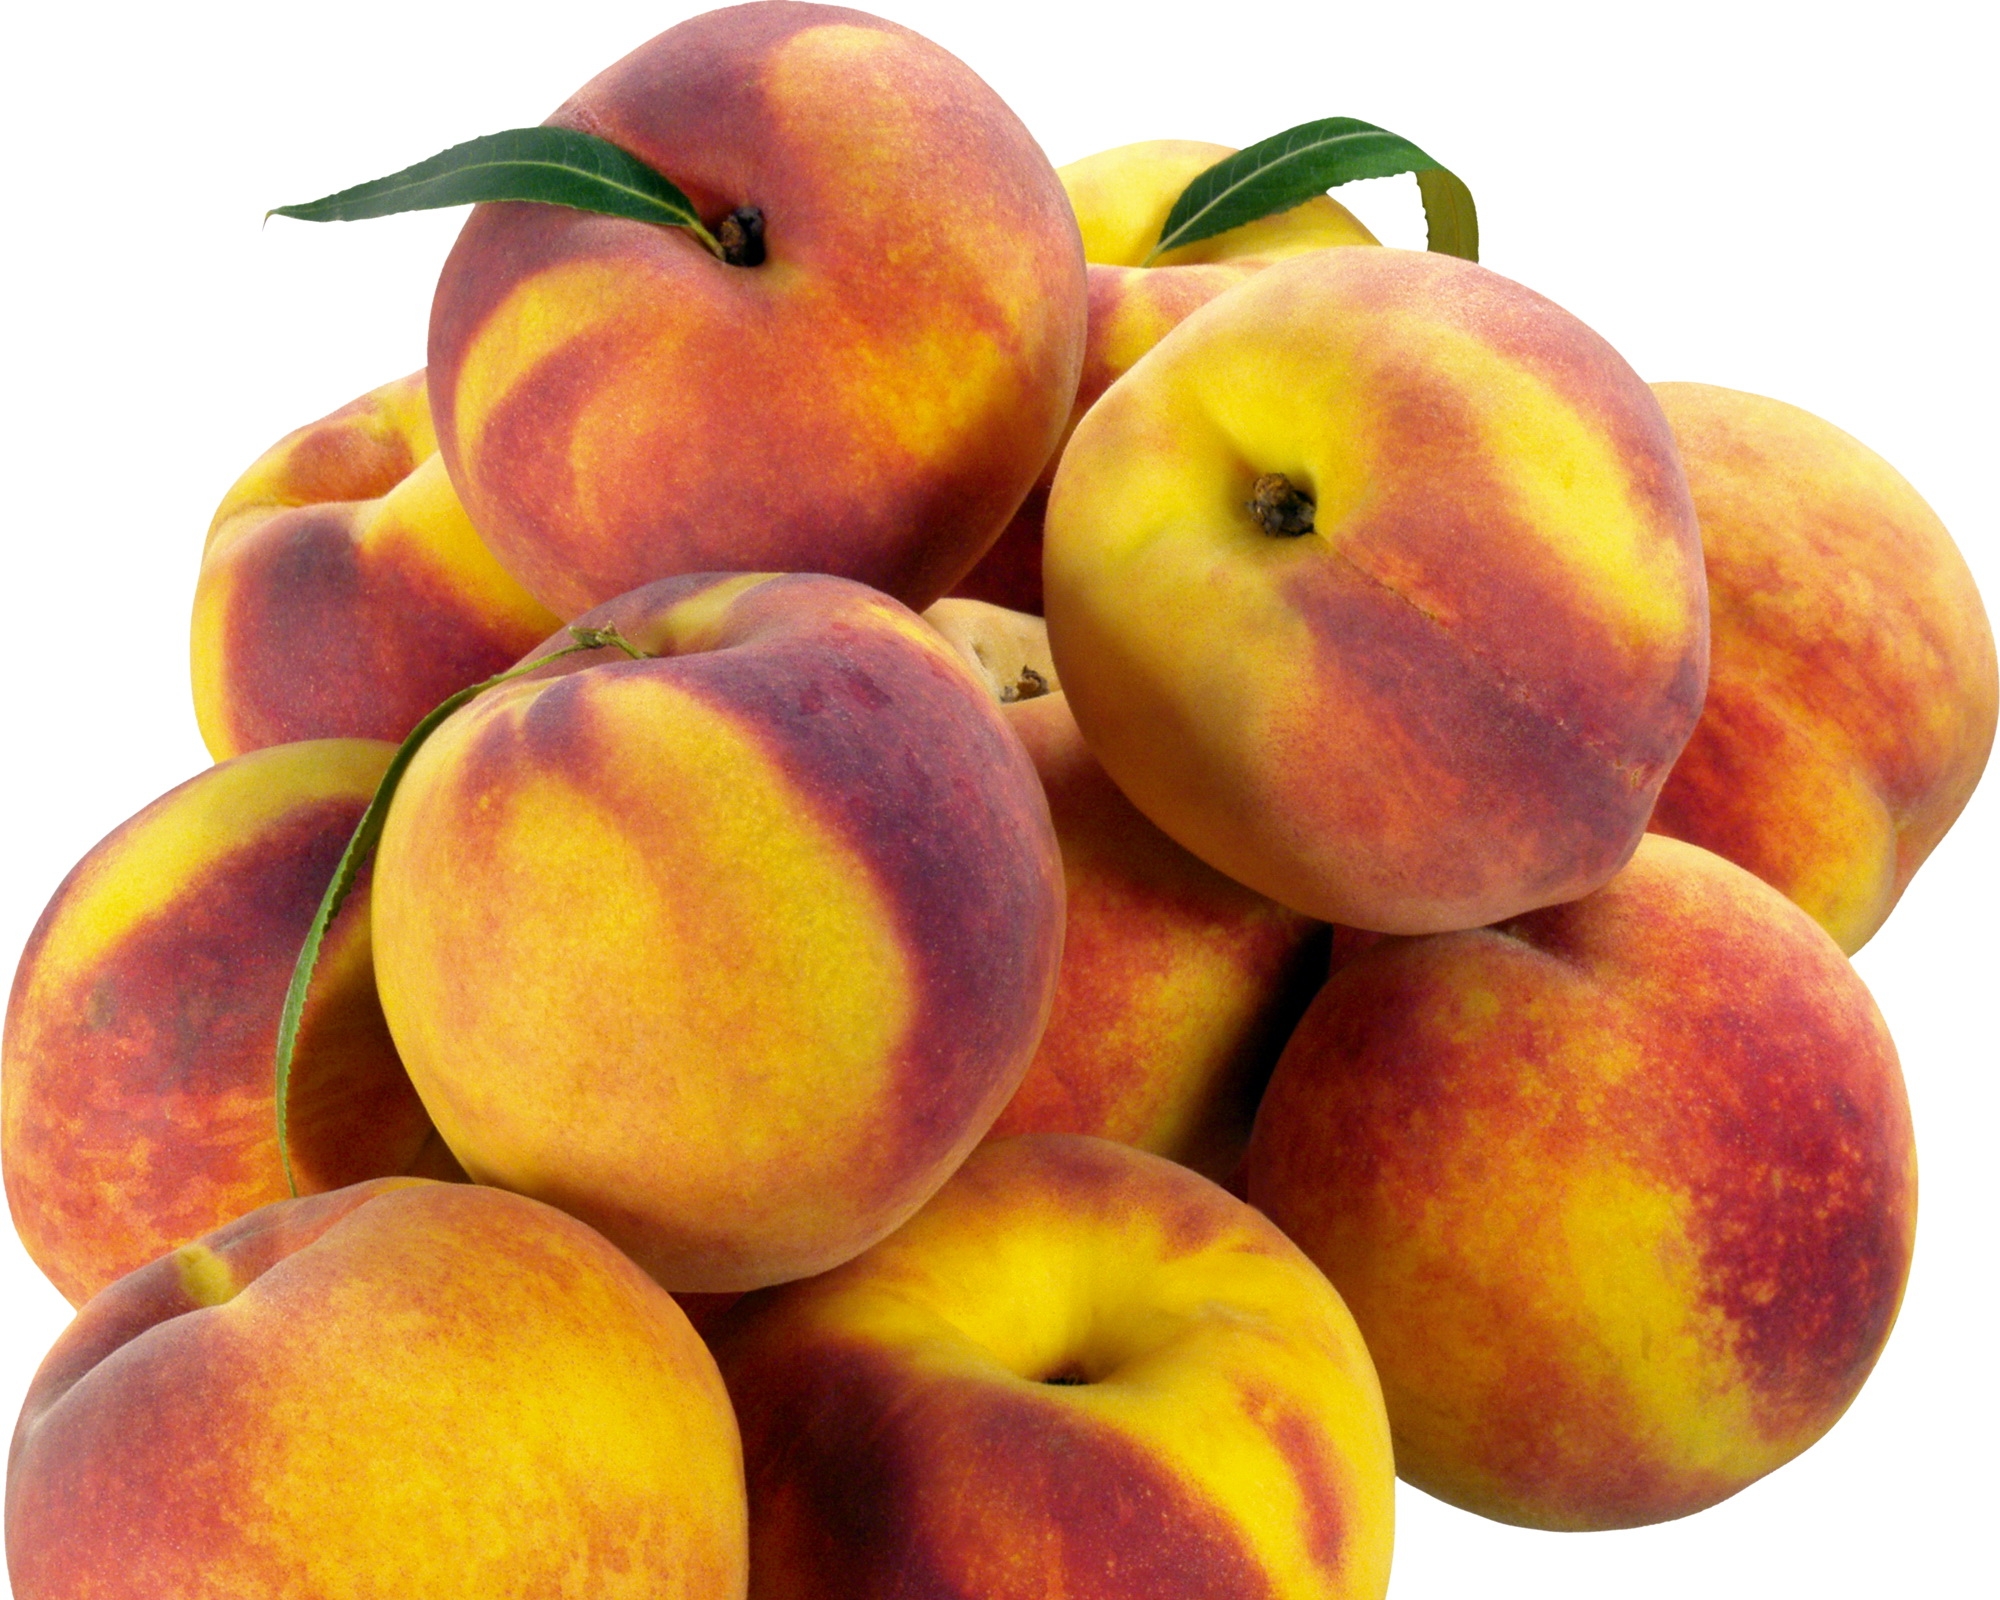 110119 download wallpaper fruits, food, peaches, branch screensavers and pictures for free